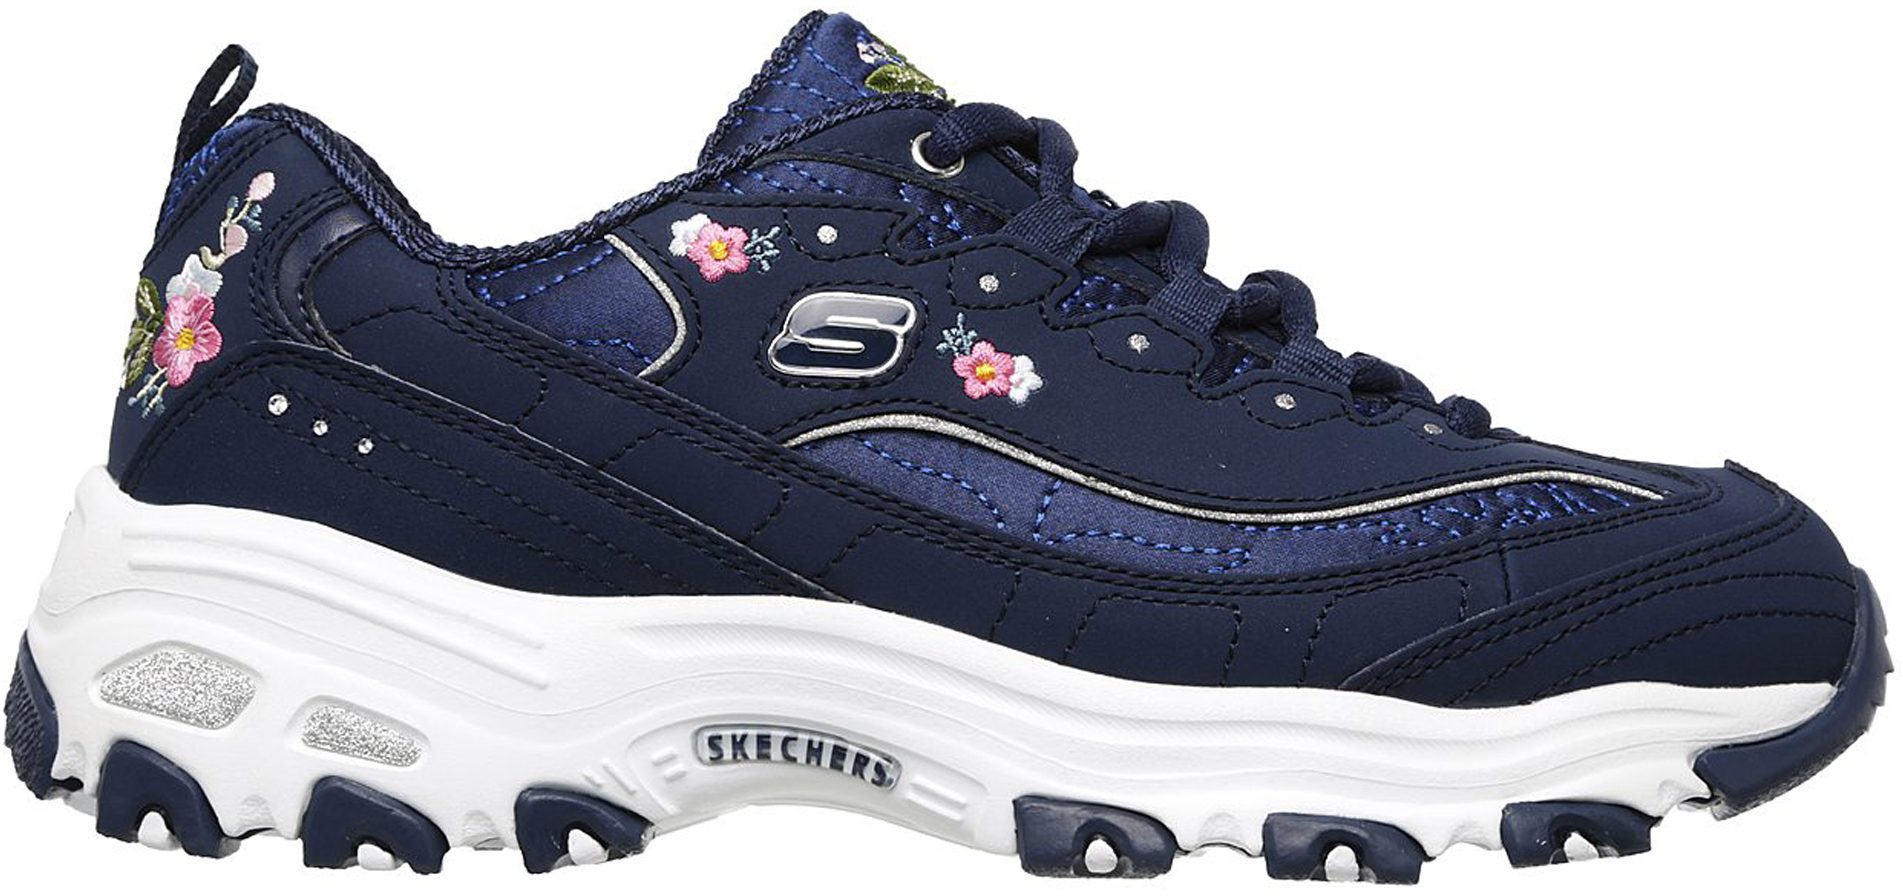 Skechers D'Lites - Bright Blossoms Navy 11977 NVY - Womens Trainers ...